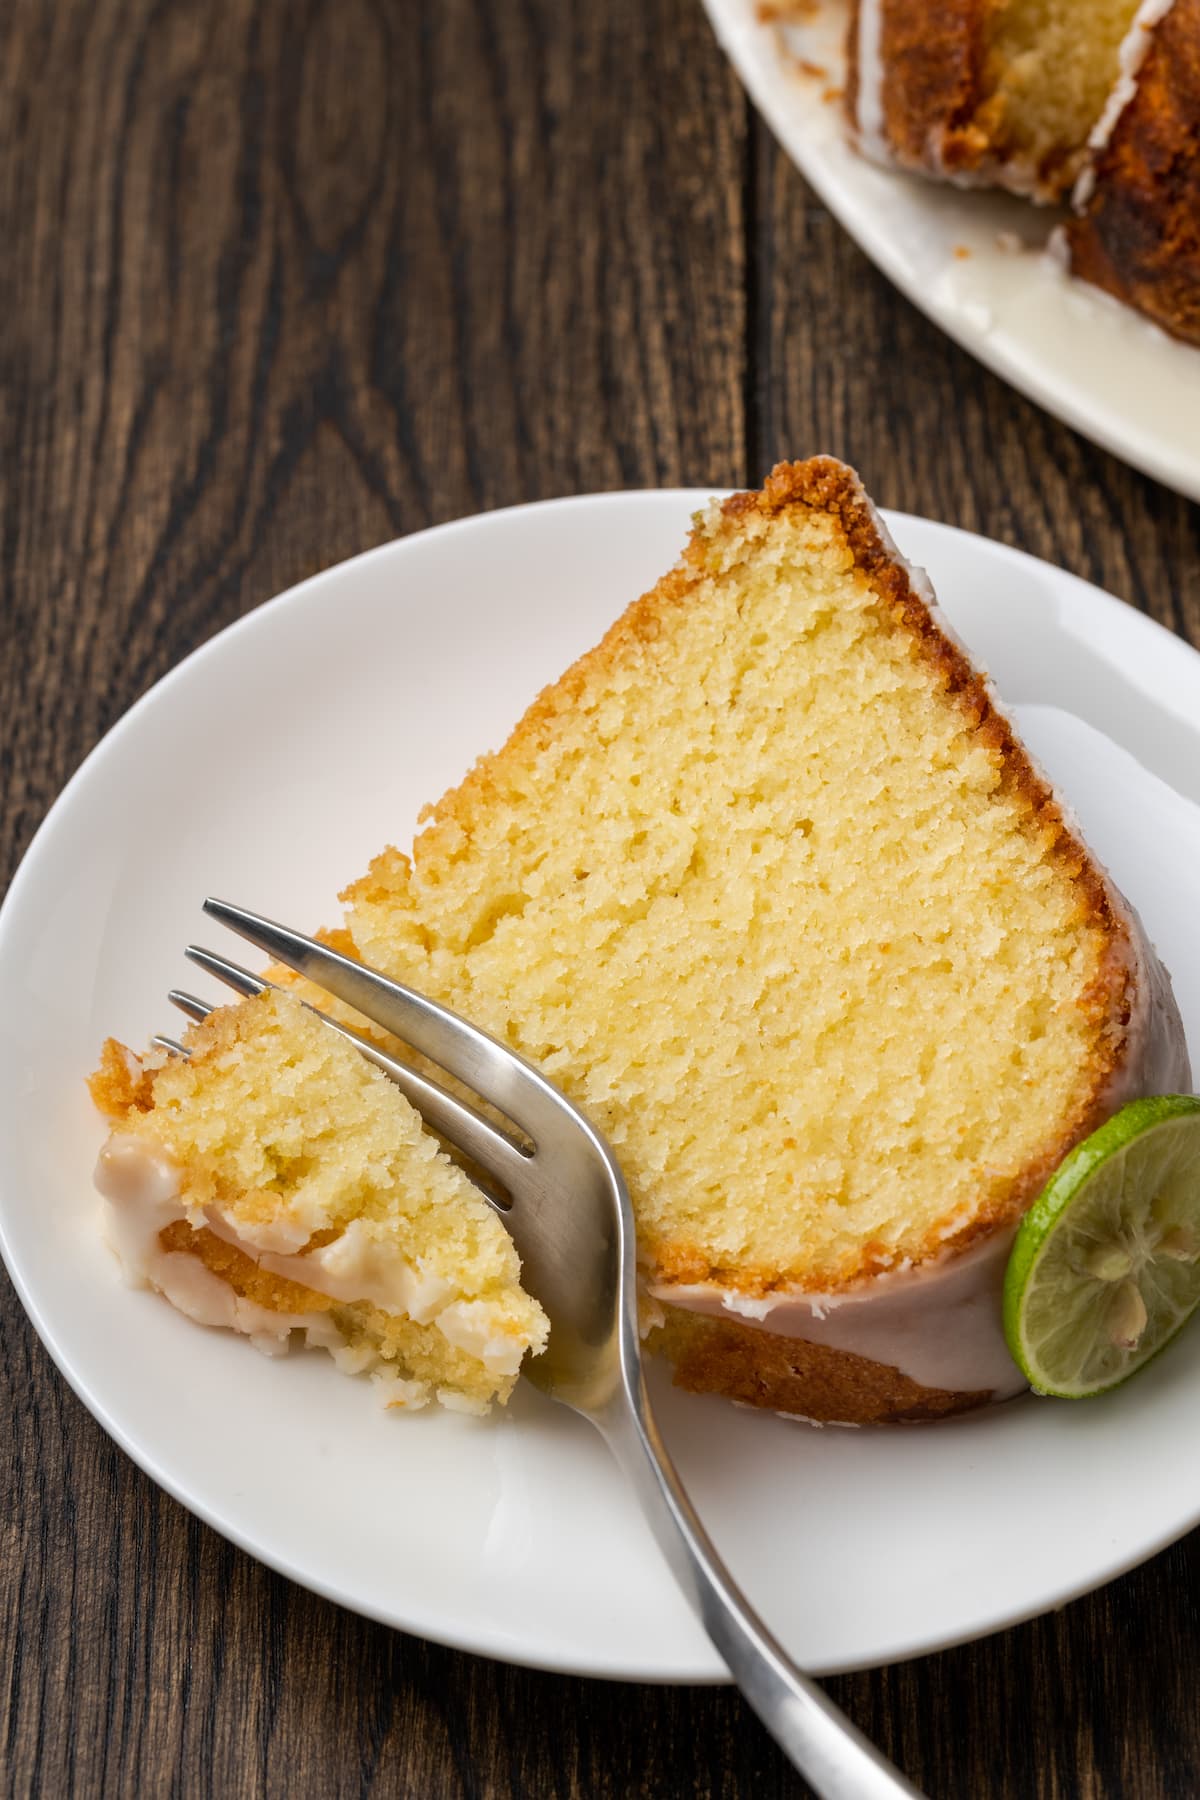 A fork cuts into the corner of a slice of Key lime pound cake on a white plate.